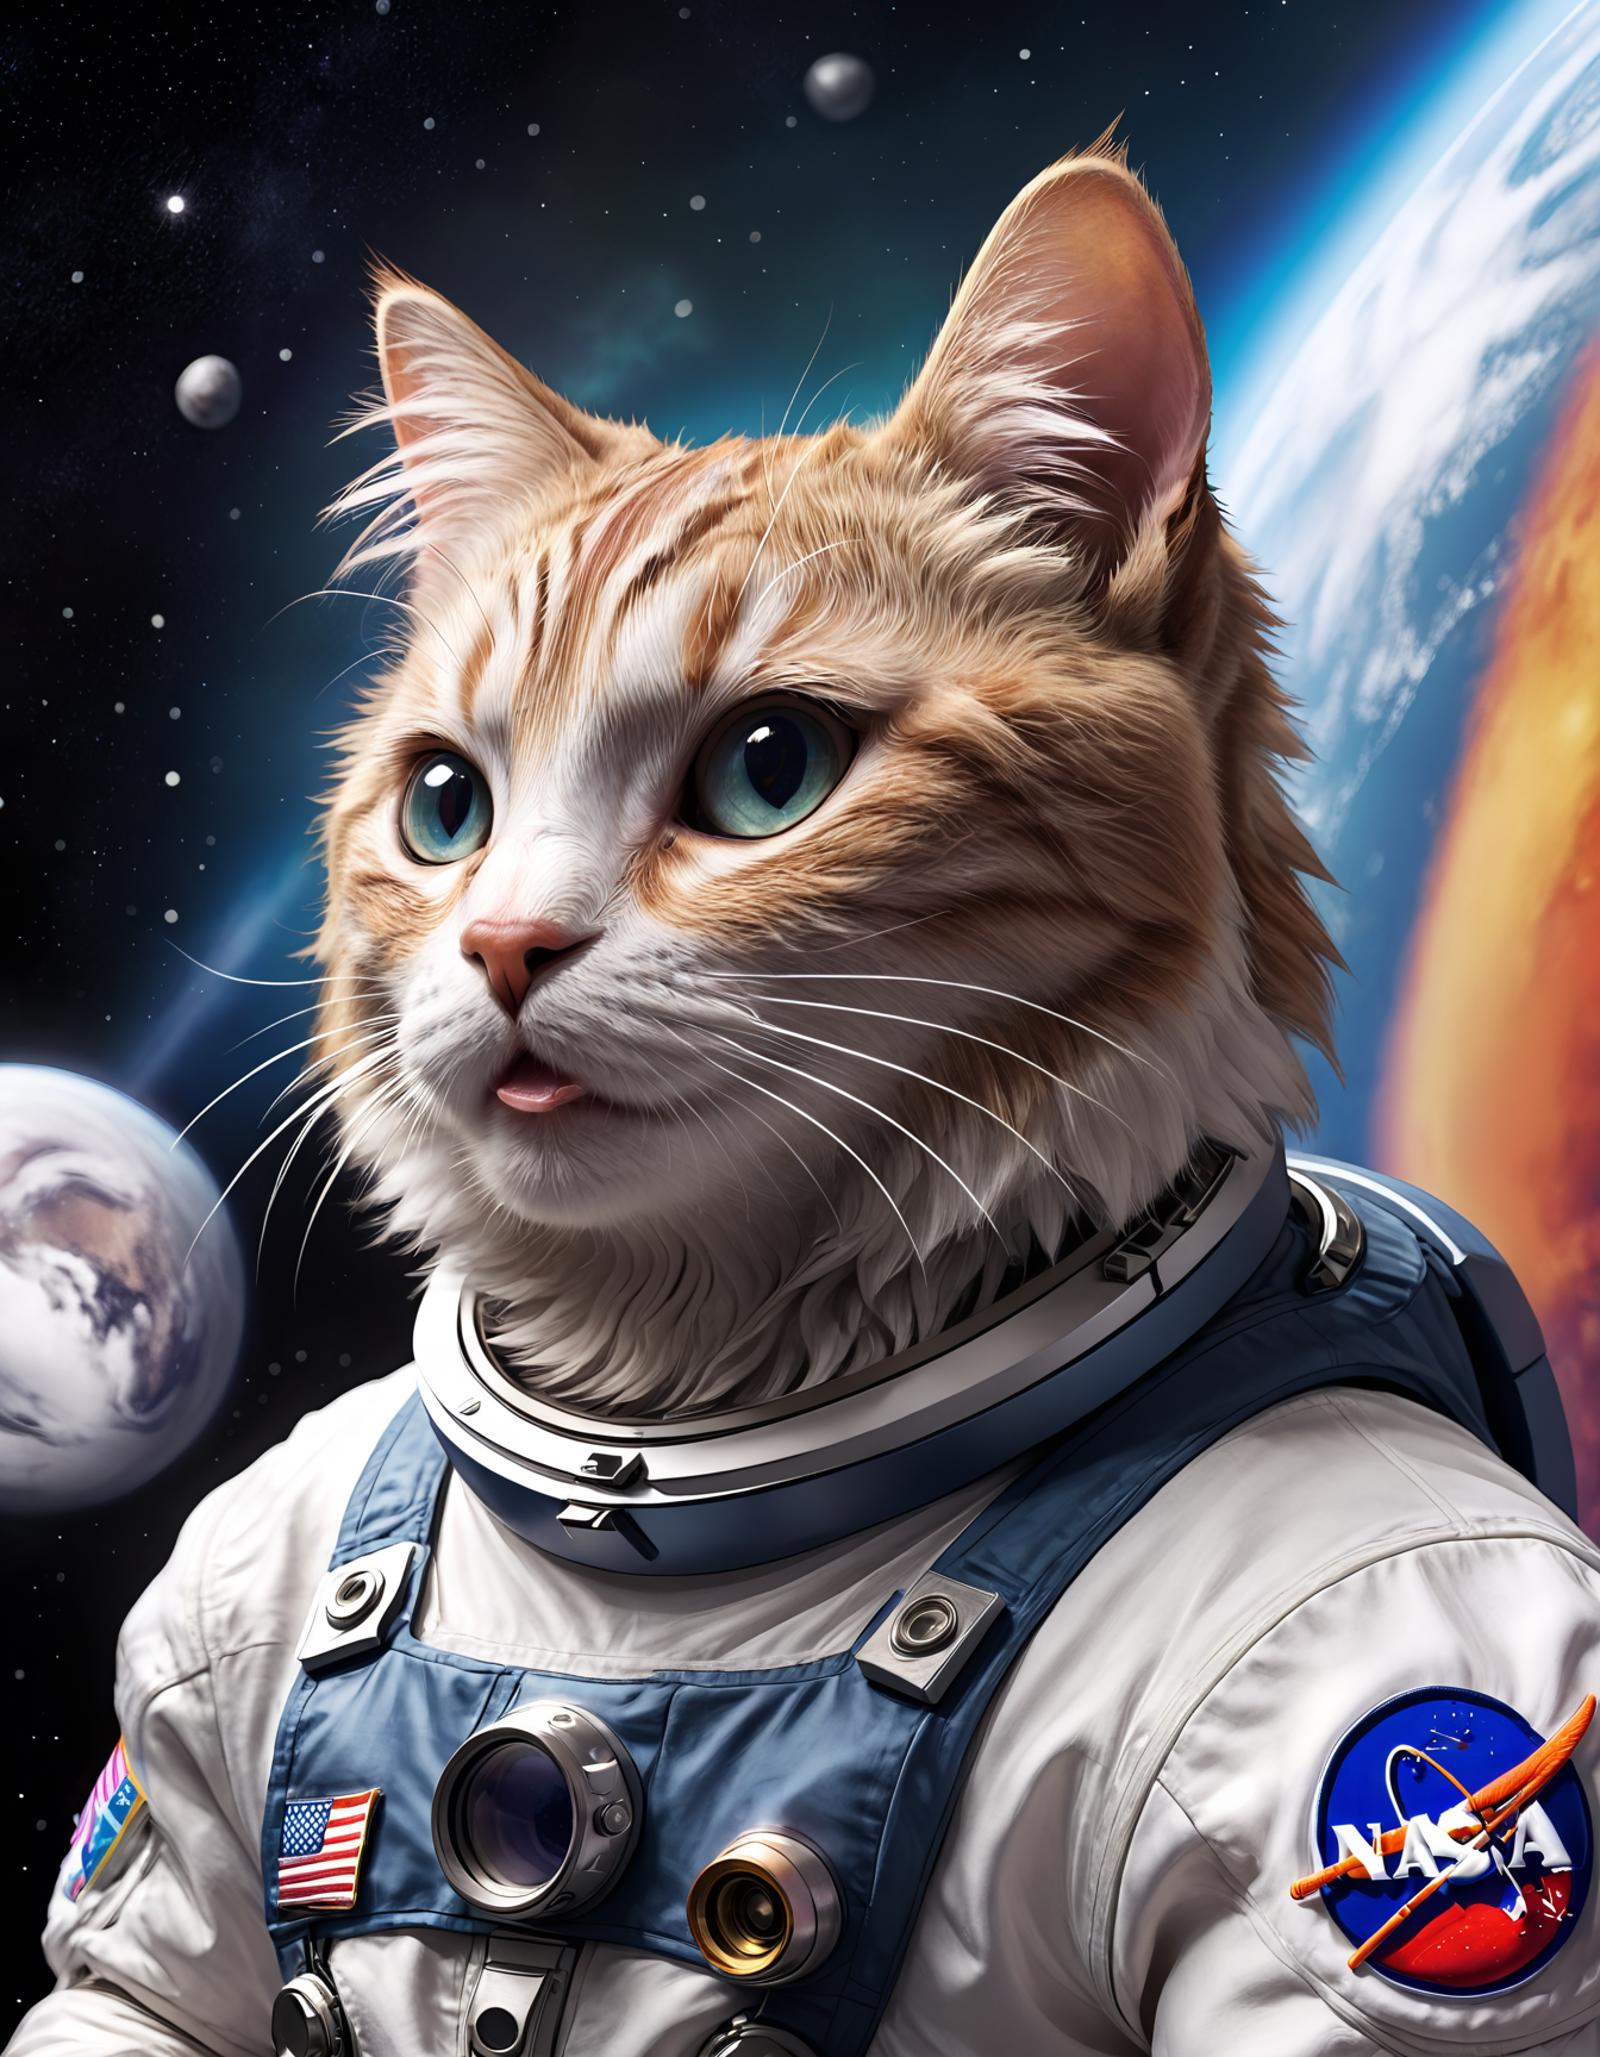 Blep XL image by helmholtzfreeenergy